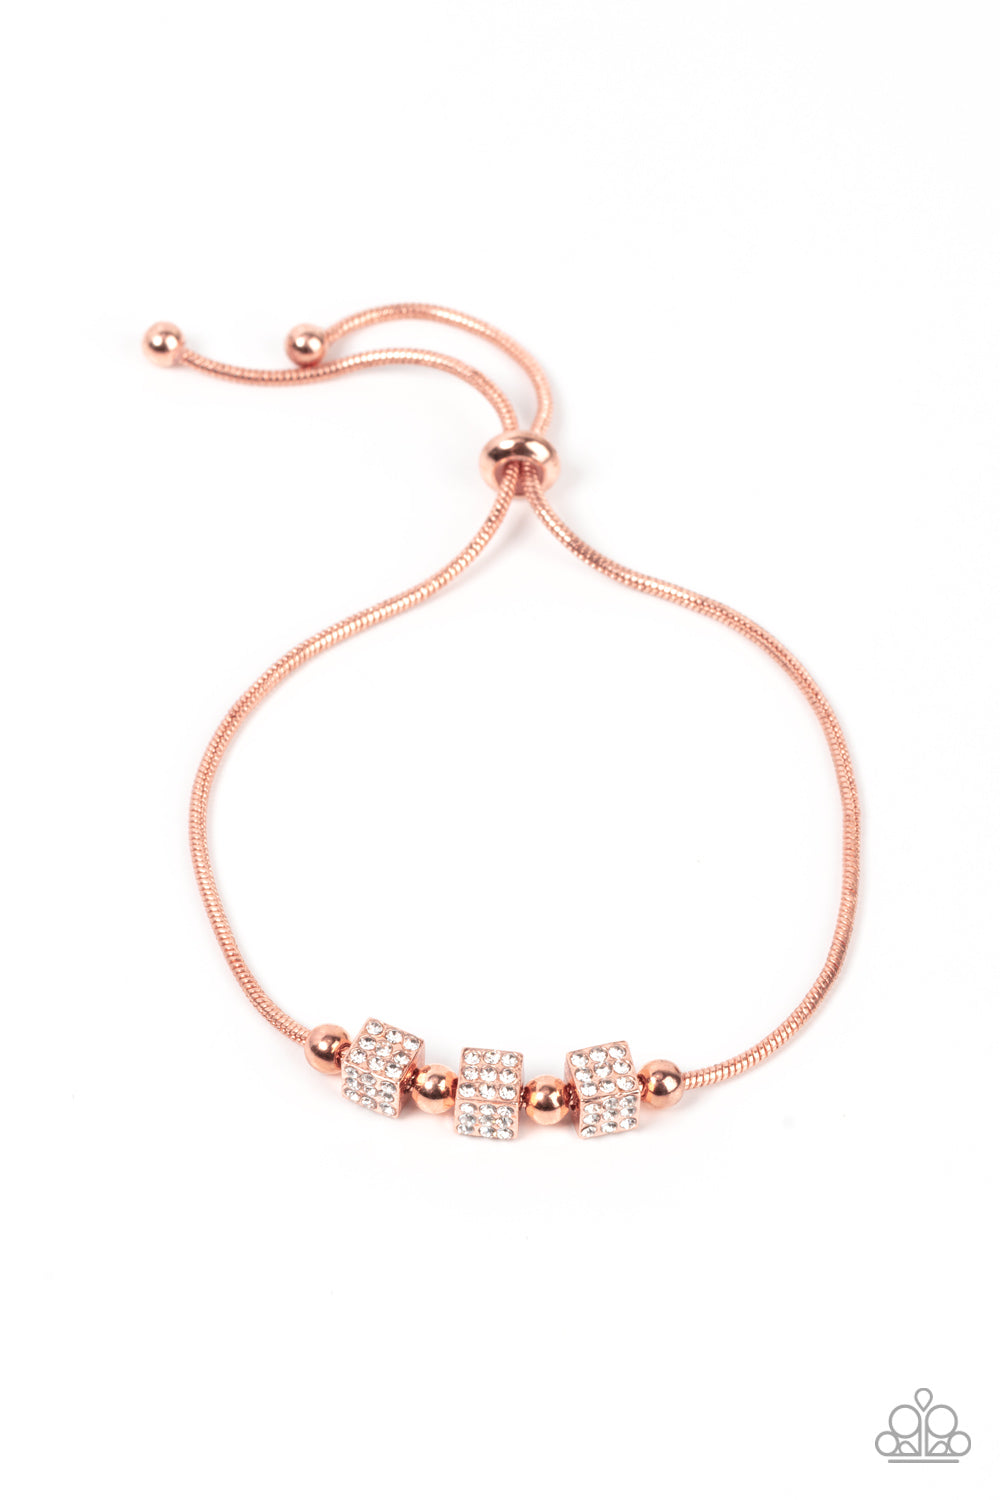 Paparazzi Bracelets - Roll Out the Radiance - Copper